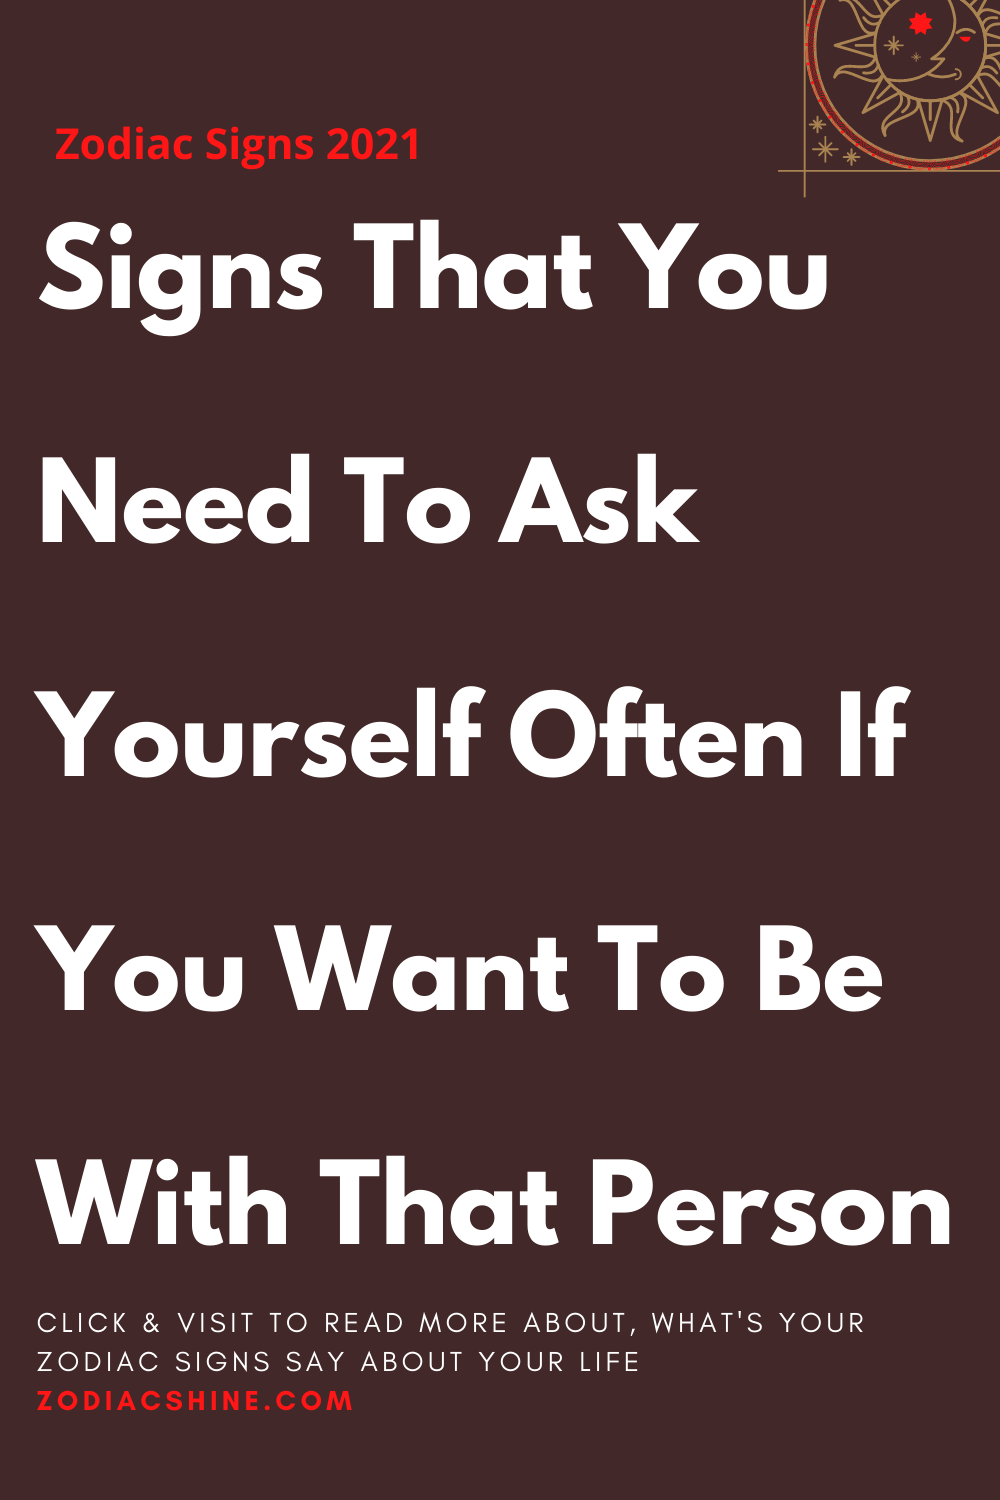 Signs That You Need To Ask Yourself Often If You Want To Be With That Person